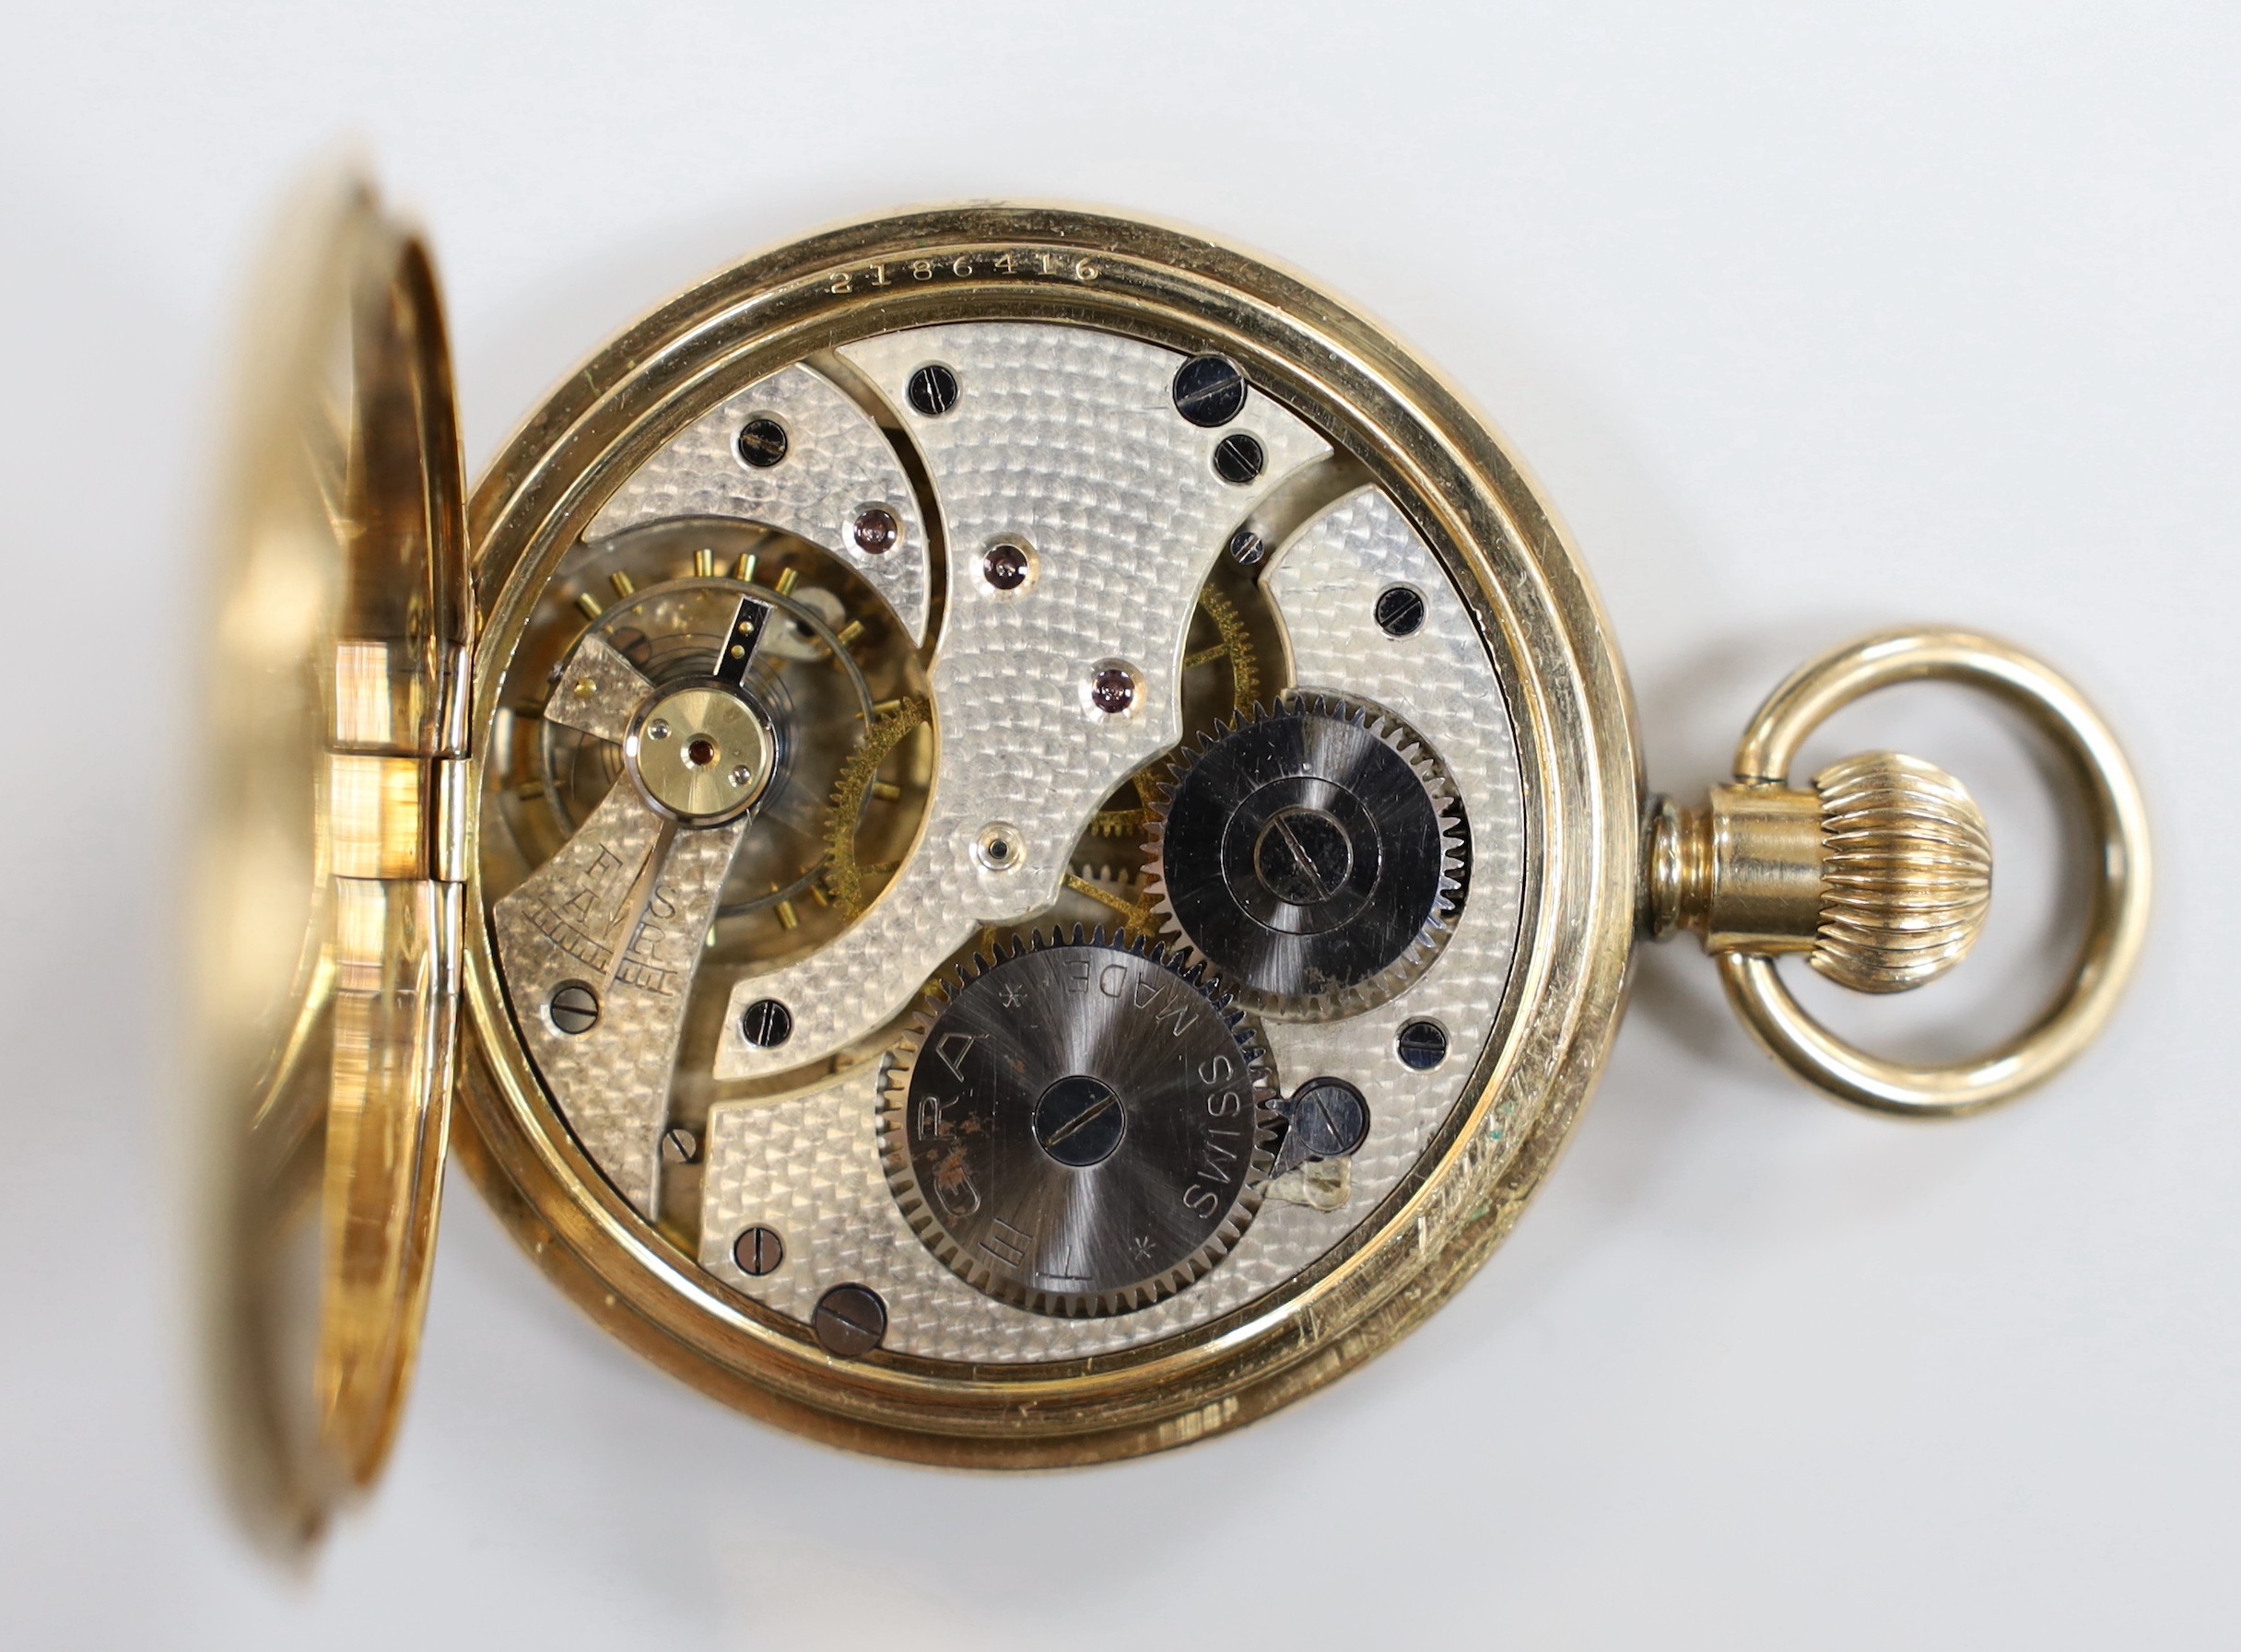 An Elgin gold plated keyless hunter pocket watch, with Roman dial and engraved interior inscription.